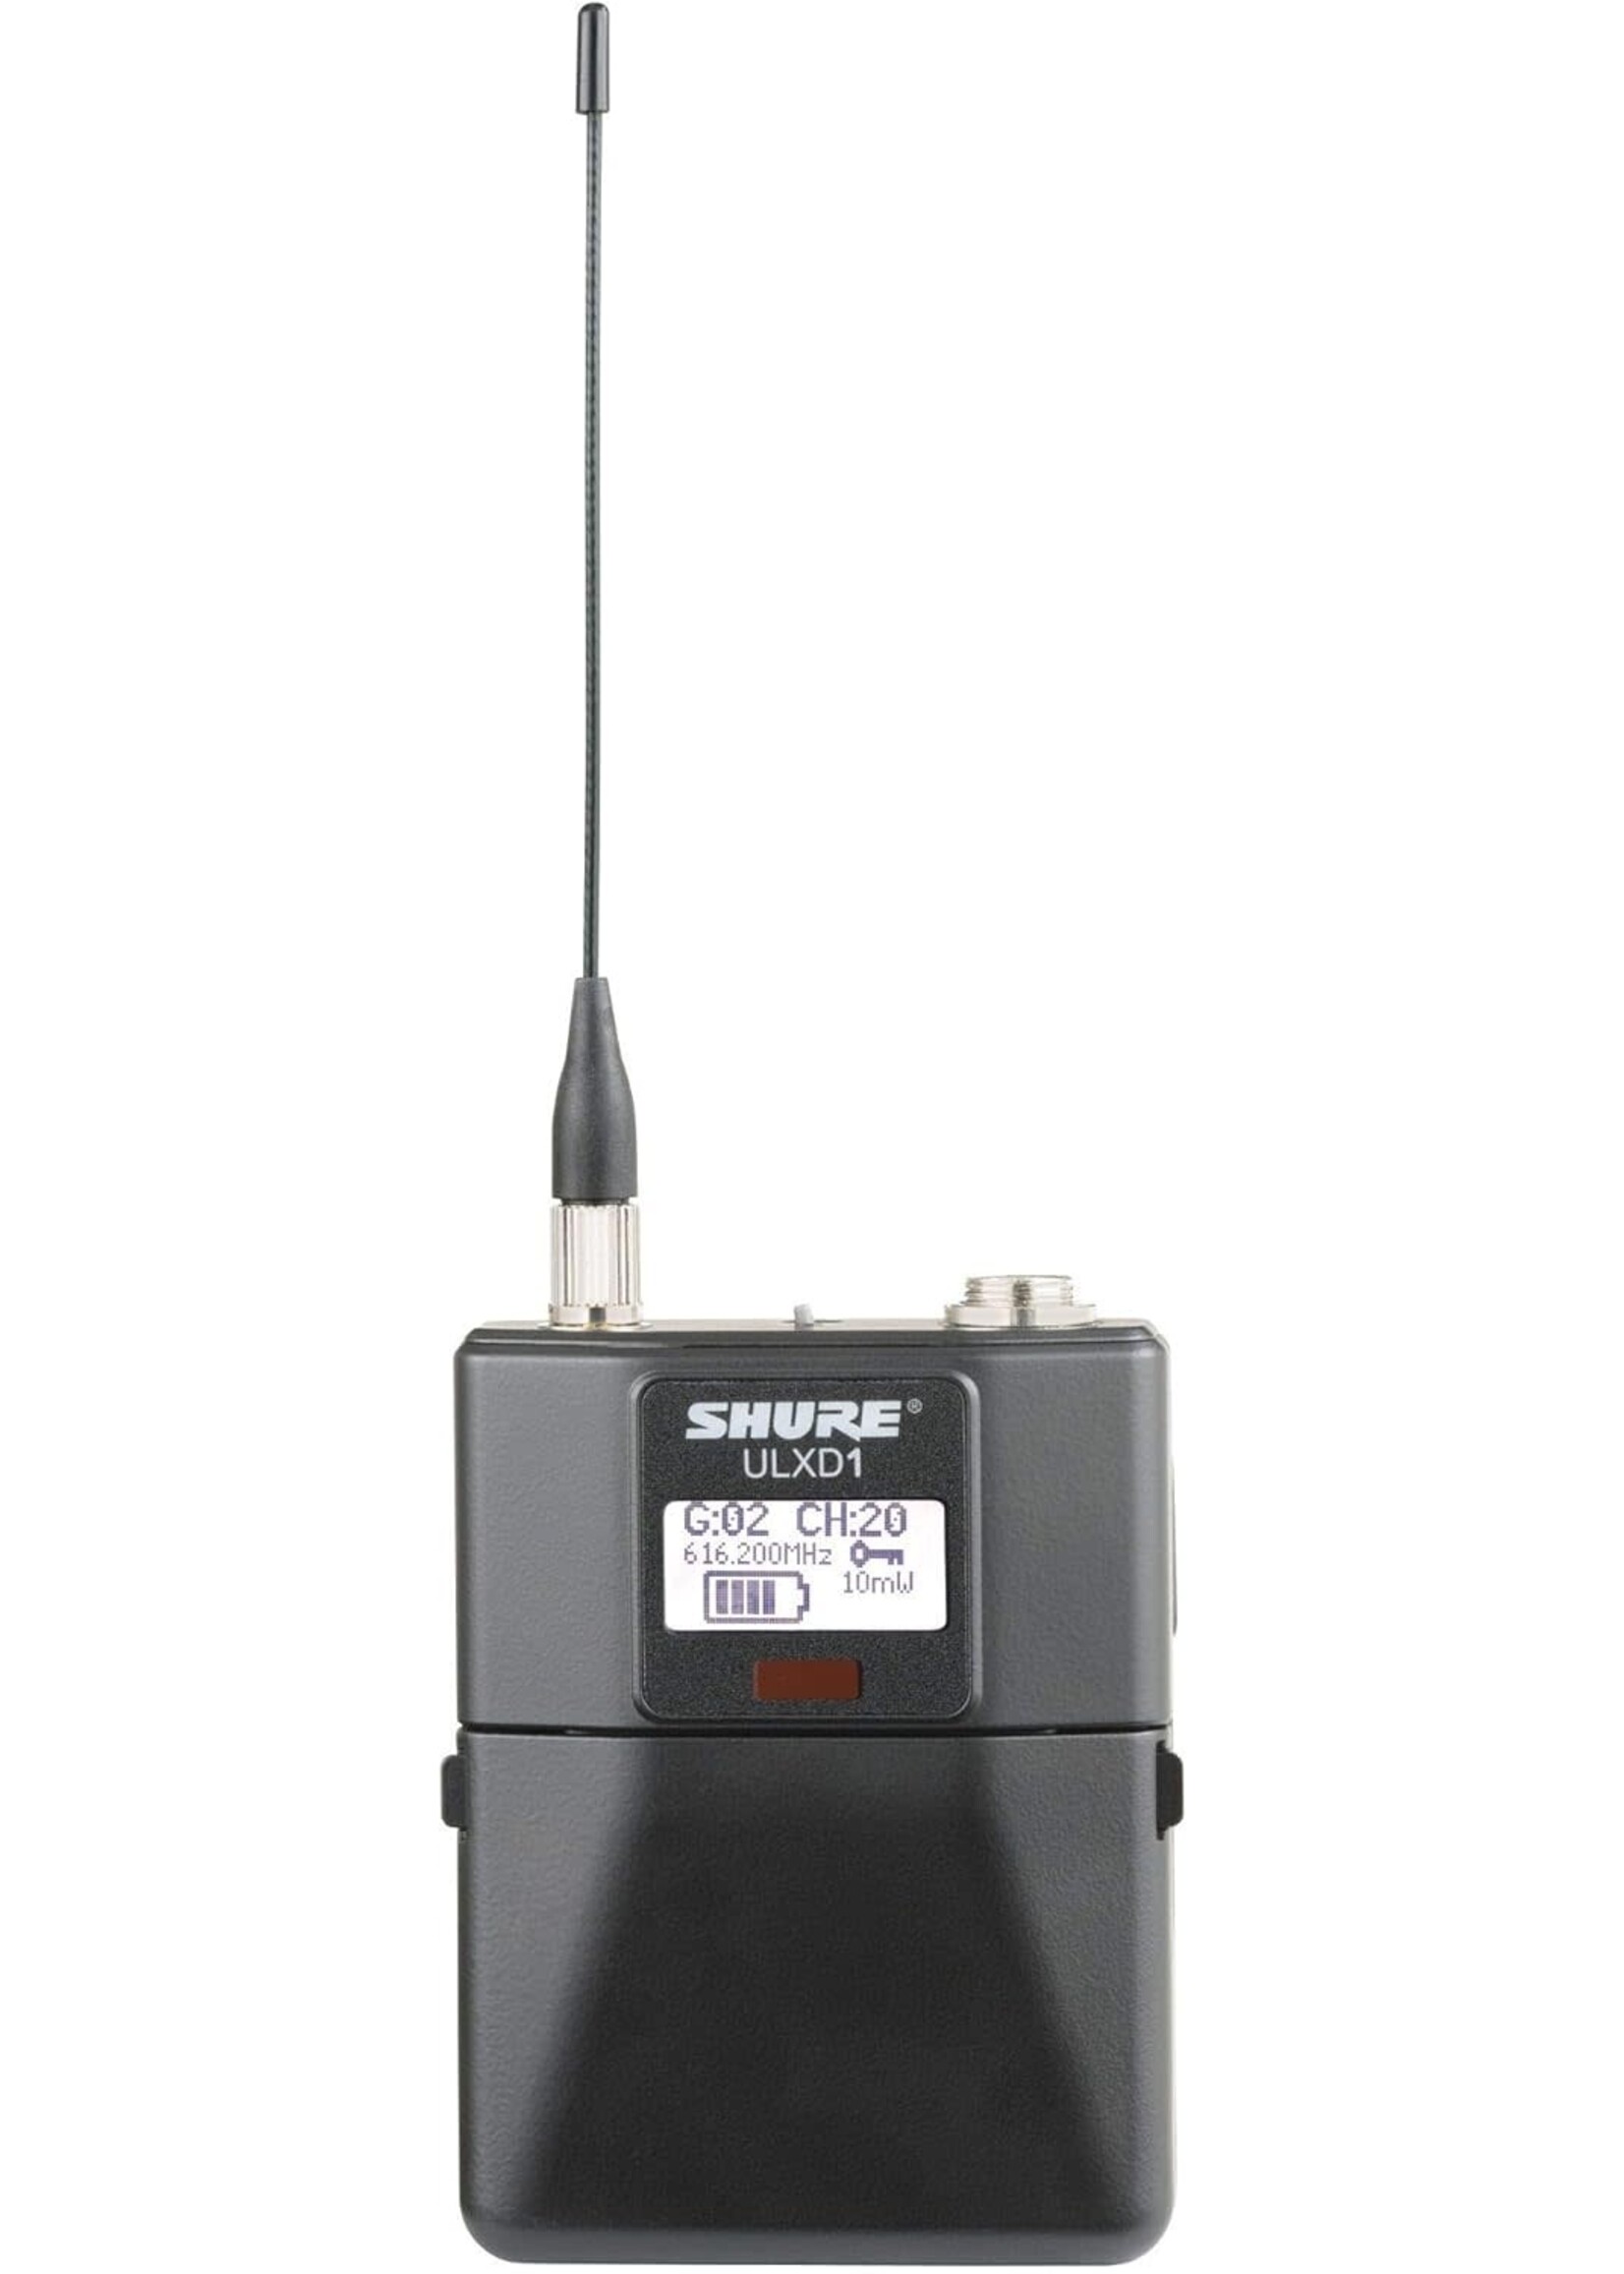 Shure Shure ULXD1-G50 Digital Wireless Bodypack Transmitter with Miniature 4-Pin Connector